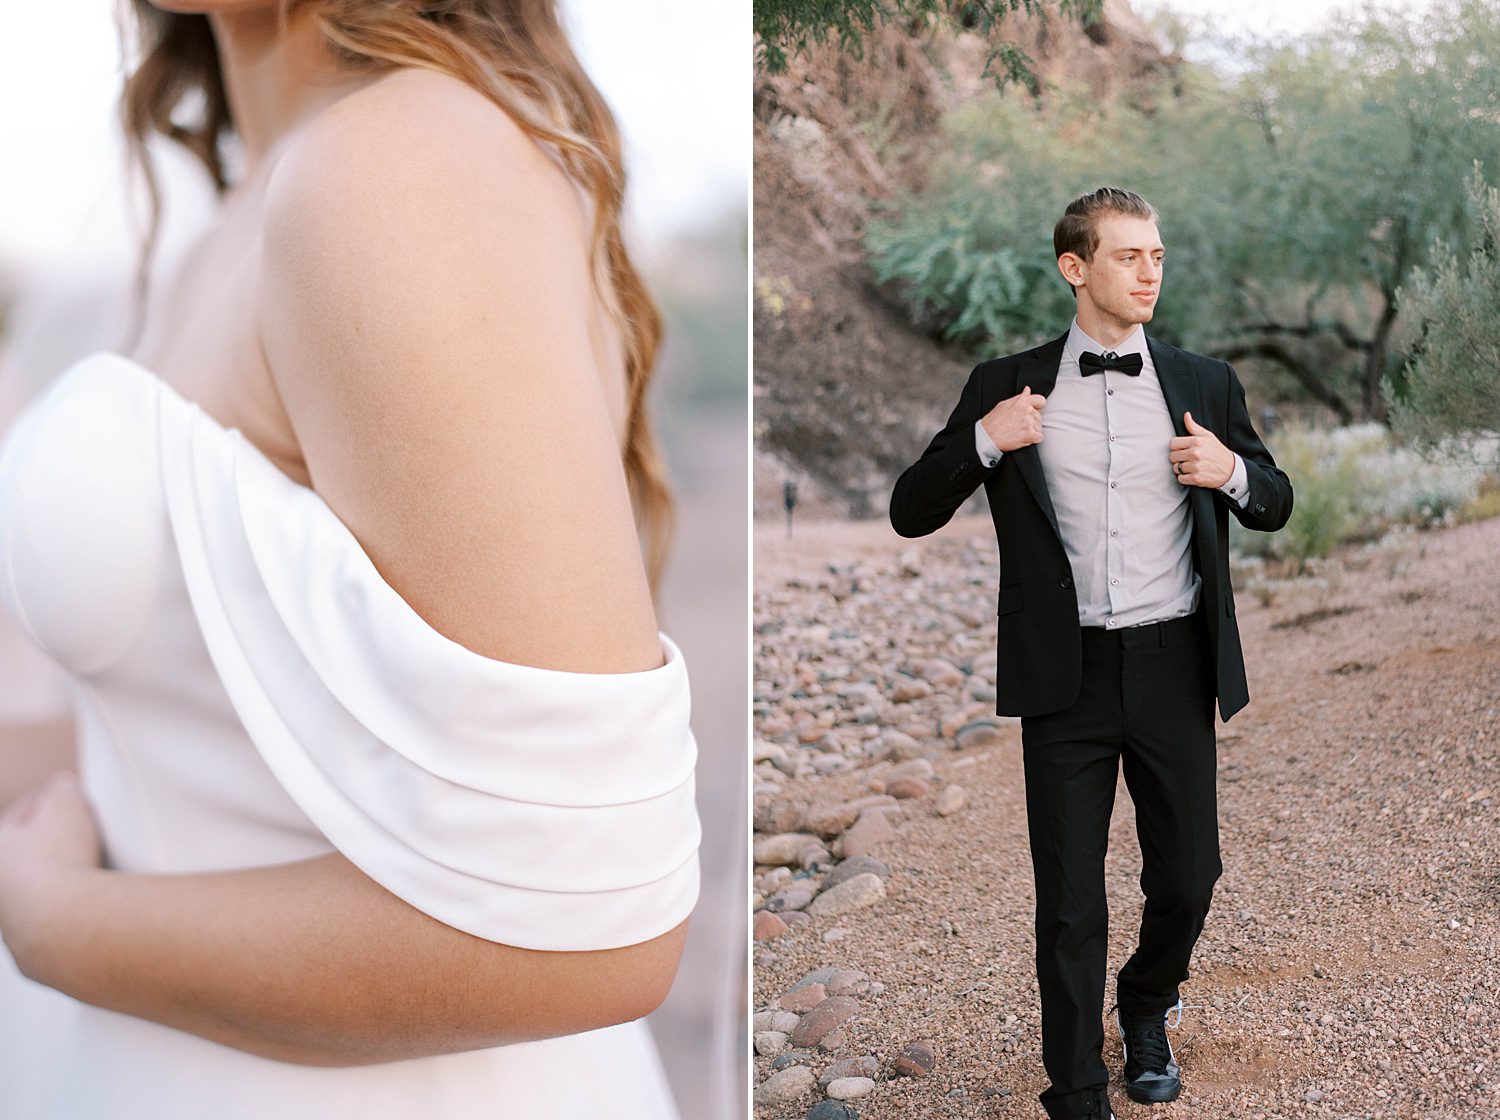 details for classic wedding day in Arizona